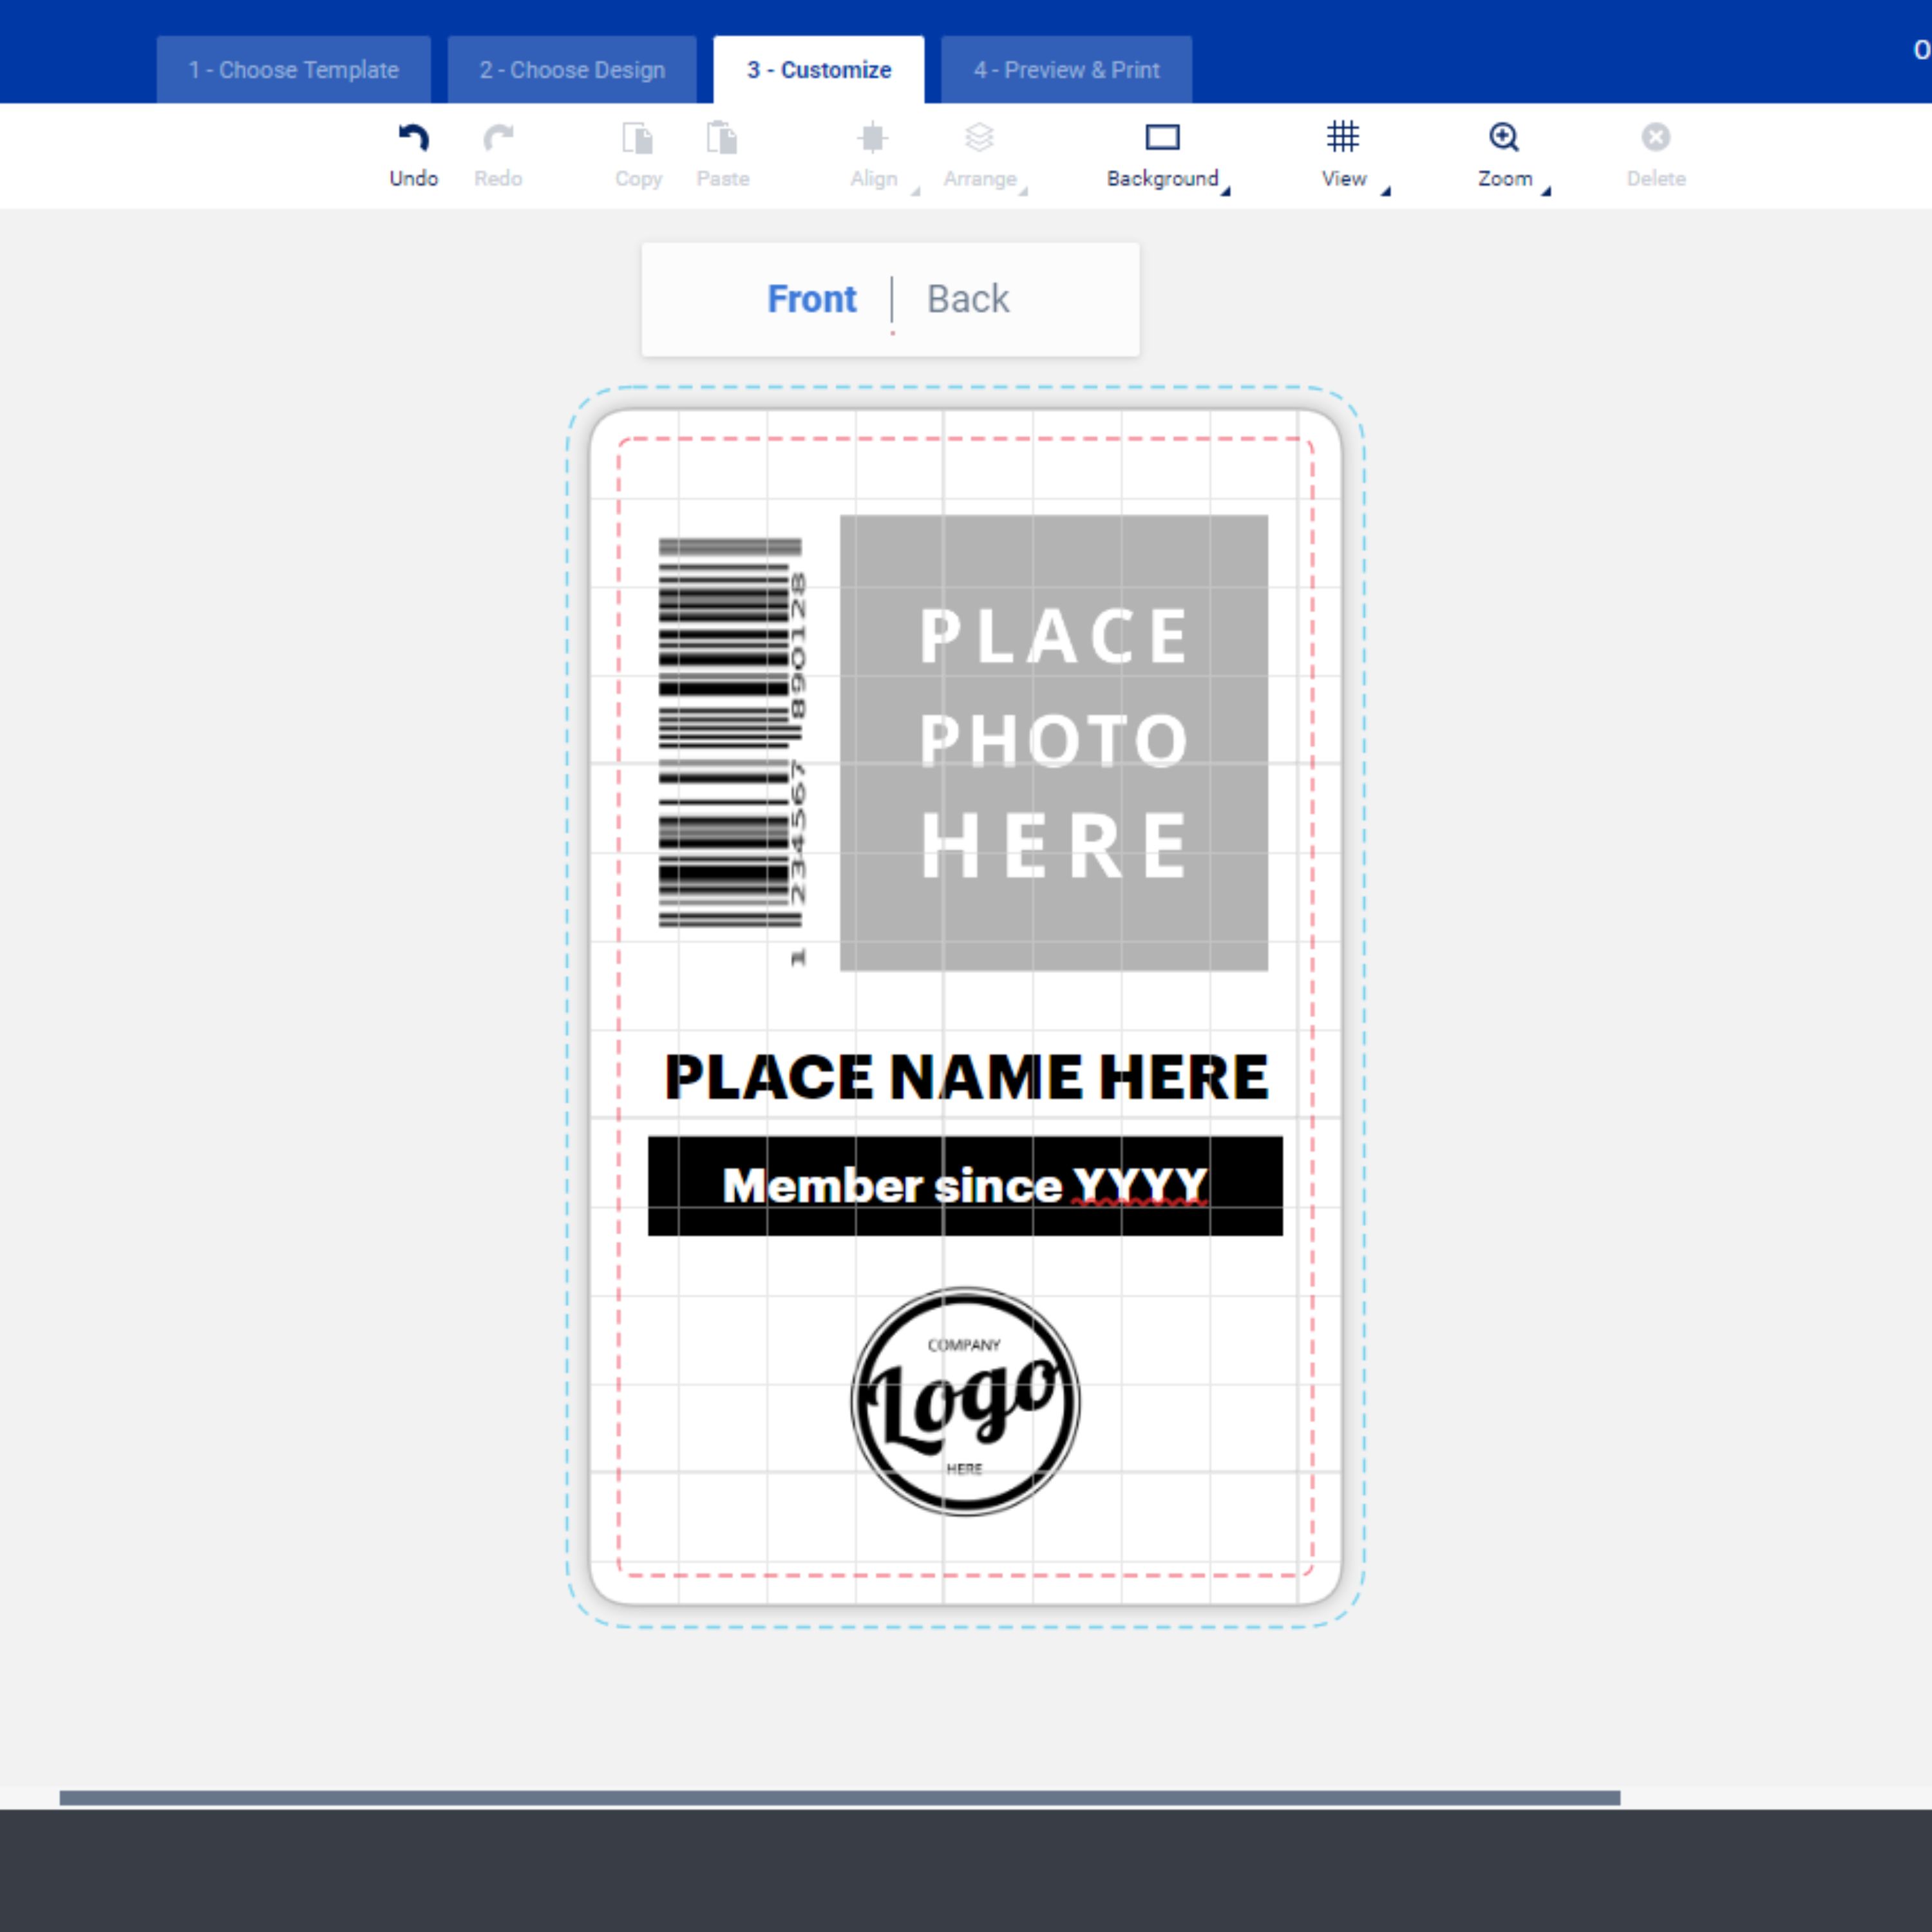 Free Avery template for a membership card employee ID card. The image is a screenshot of Avery Design and Print Online showing the template in the editor screen.